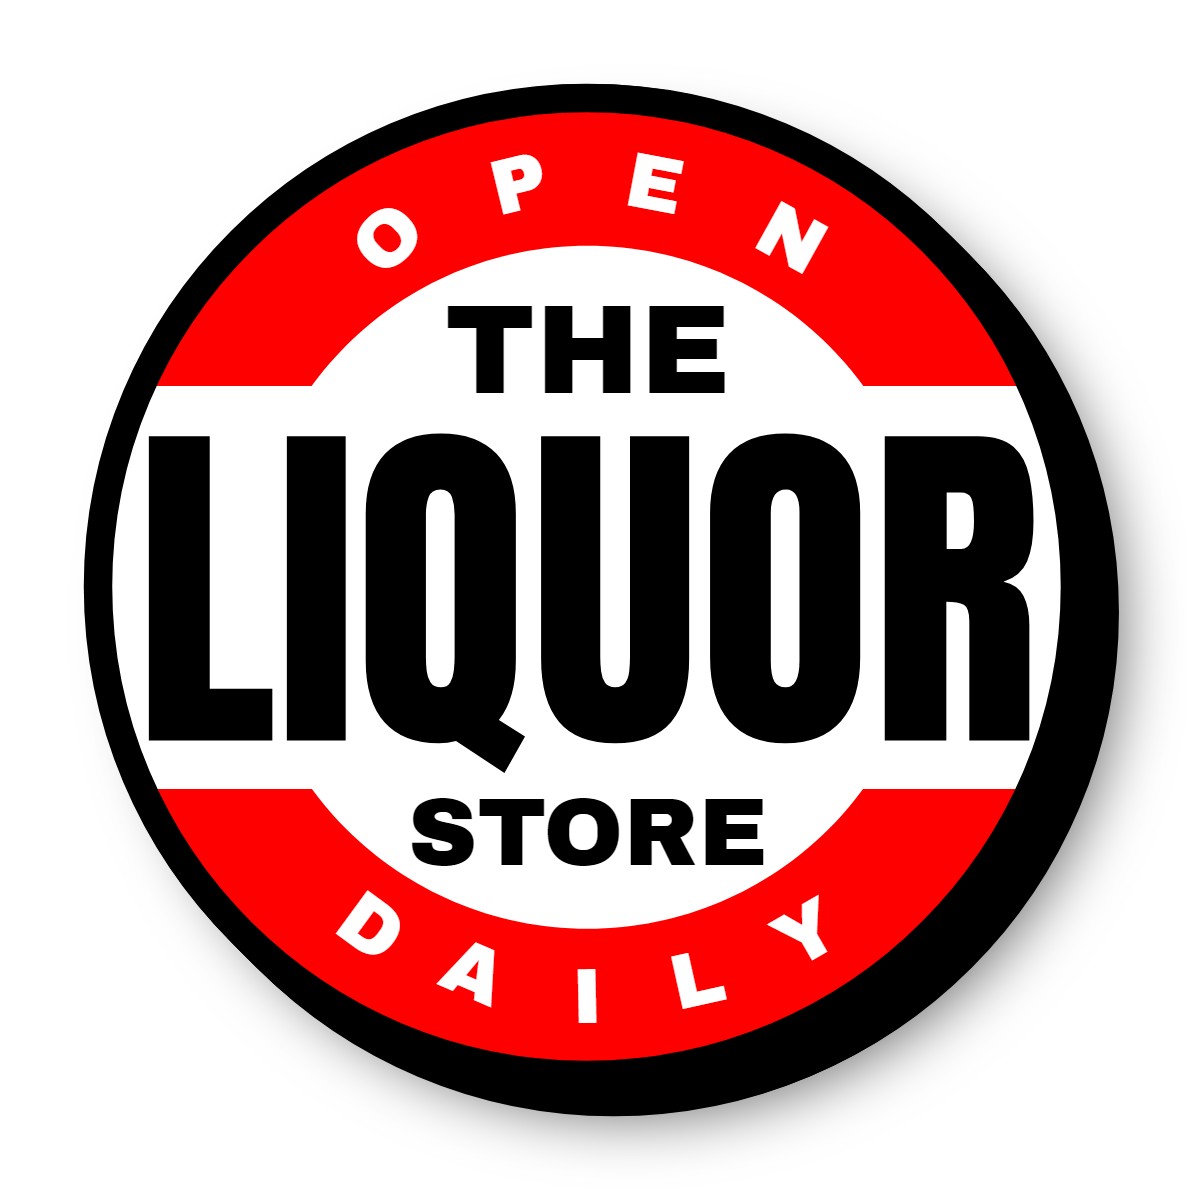 The Liquor Store Single Face Lit Shaped Cabinet Sign